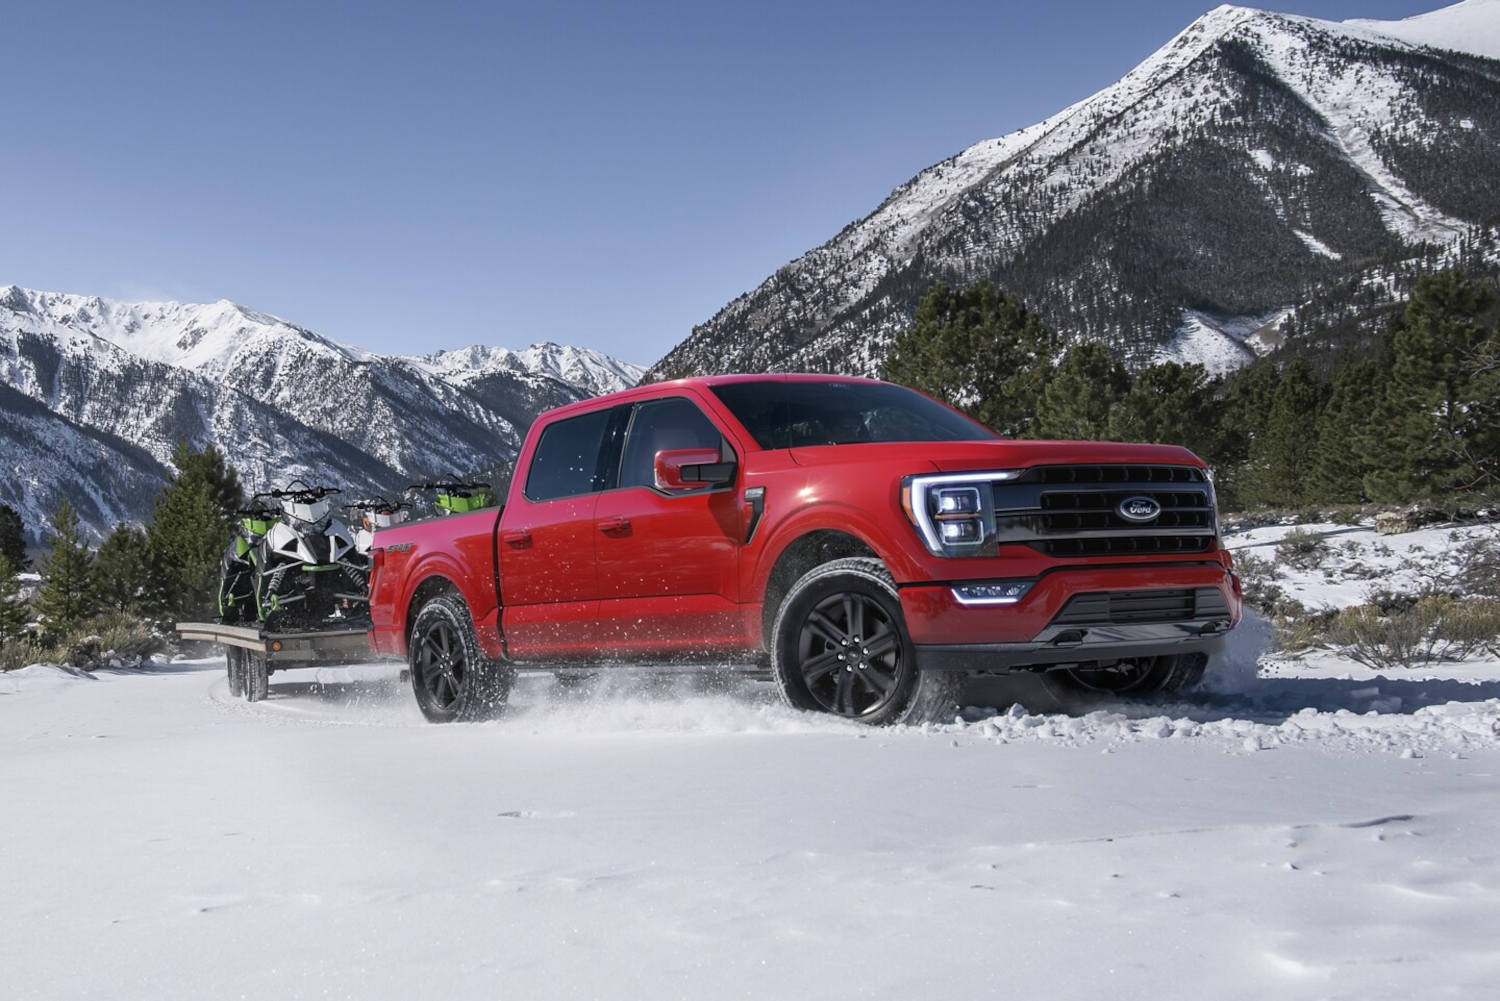 Toyota and Ford have some best selling trucks and SUVs like this F-150